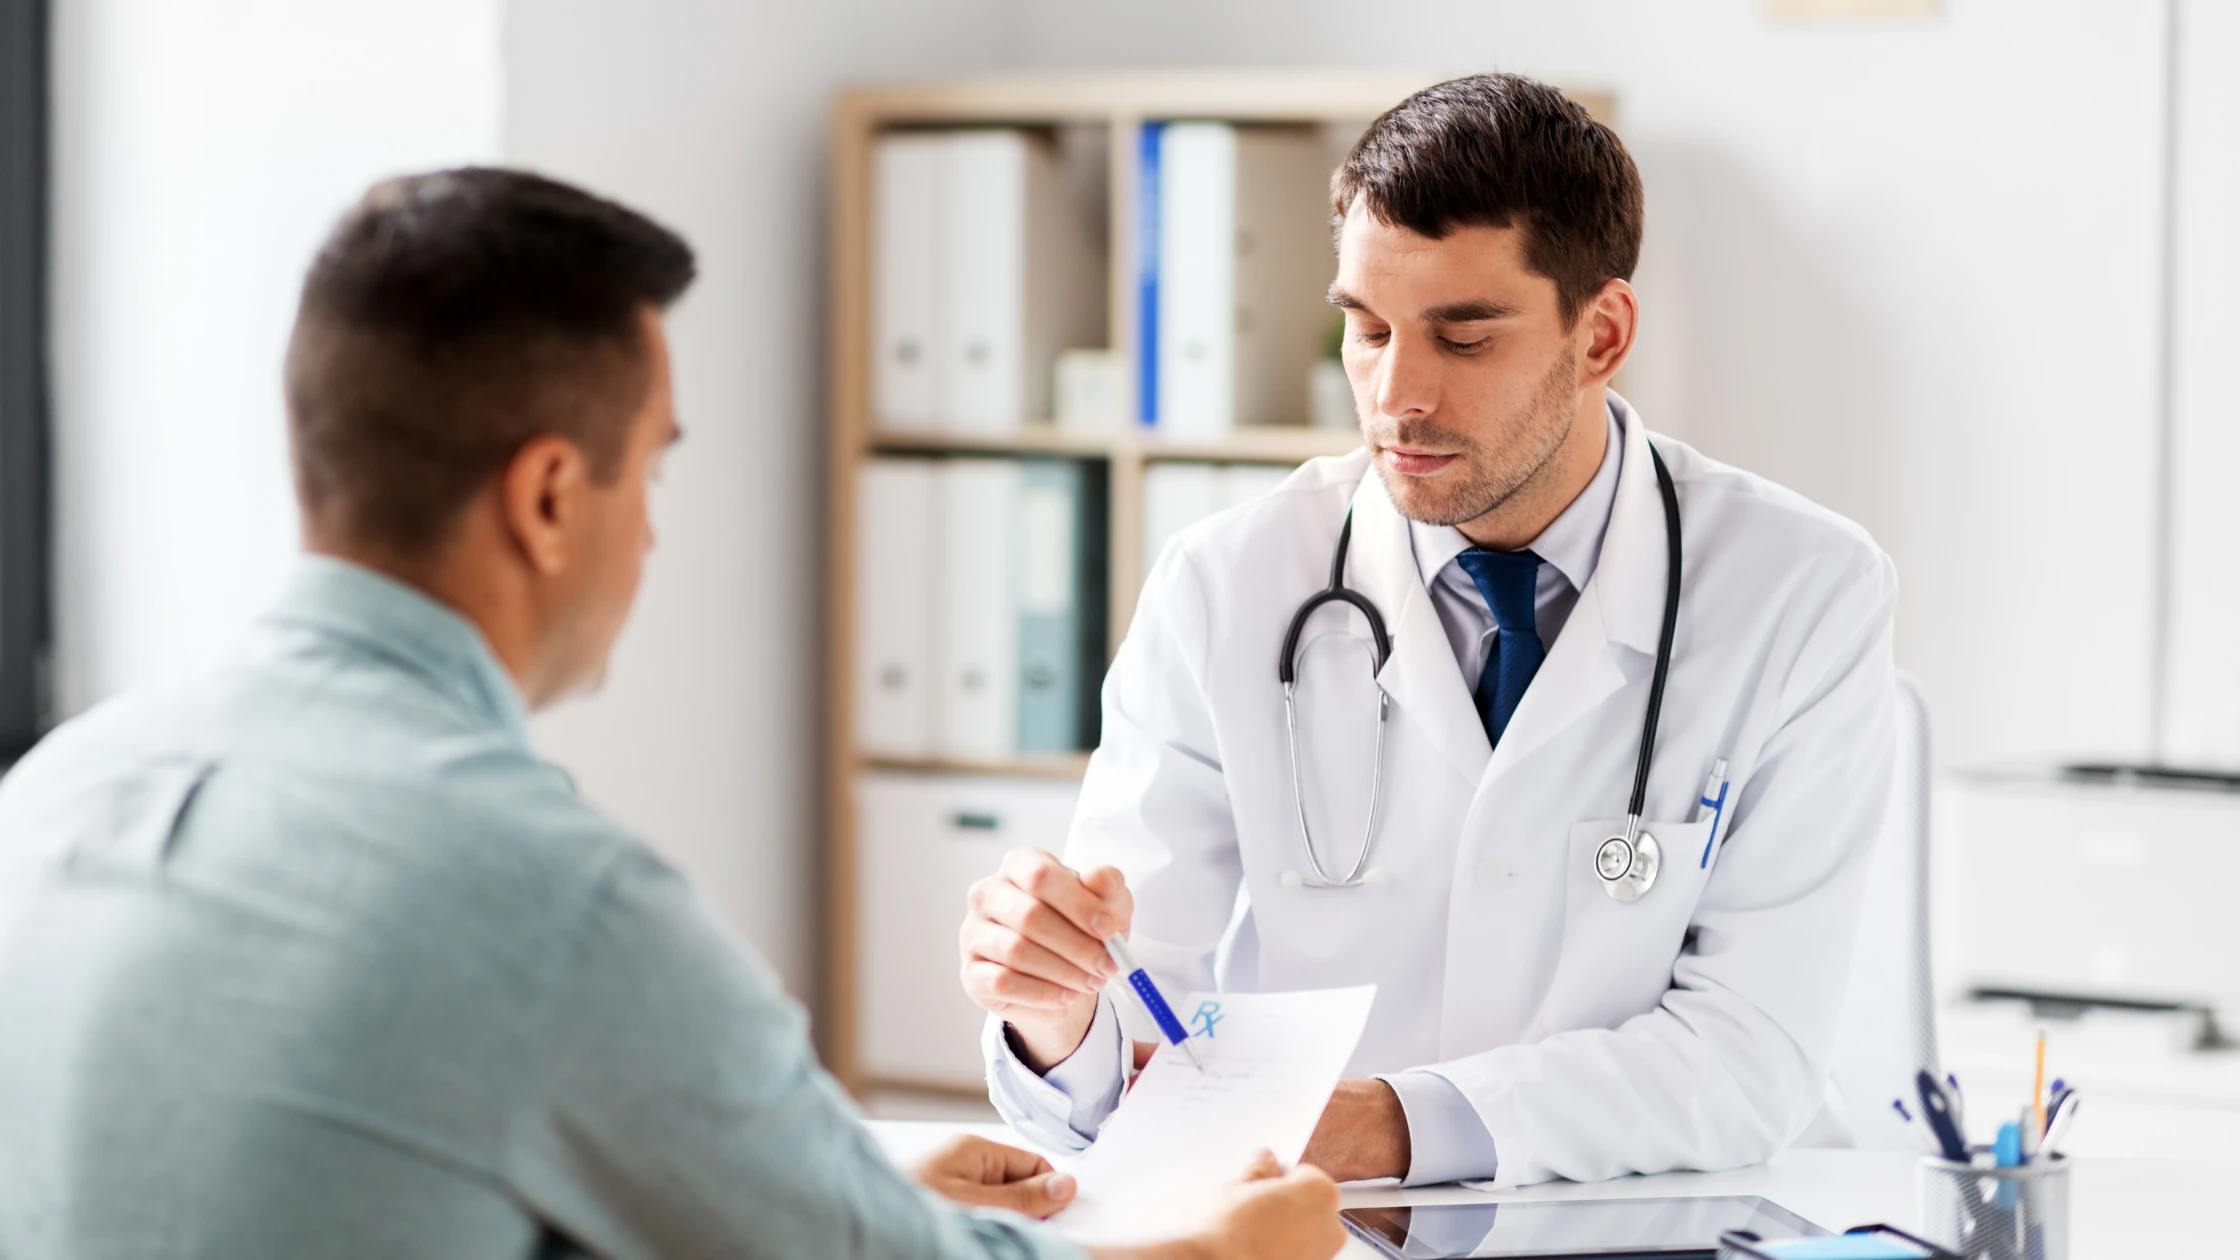 A doctor in a clinical setting discussing a patient's medical history with the patient for the purpose of writing a SOAP note.